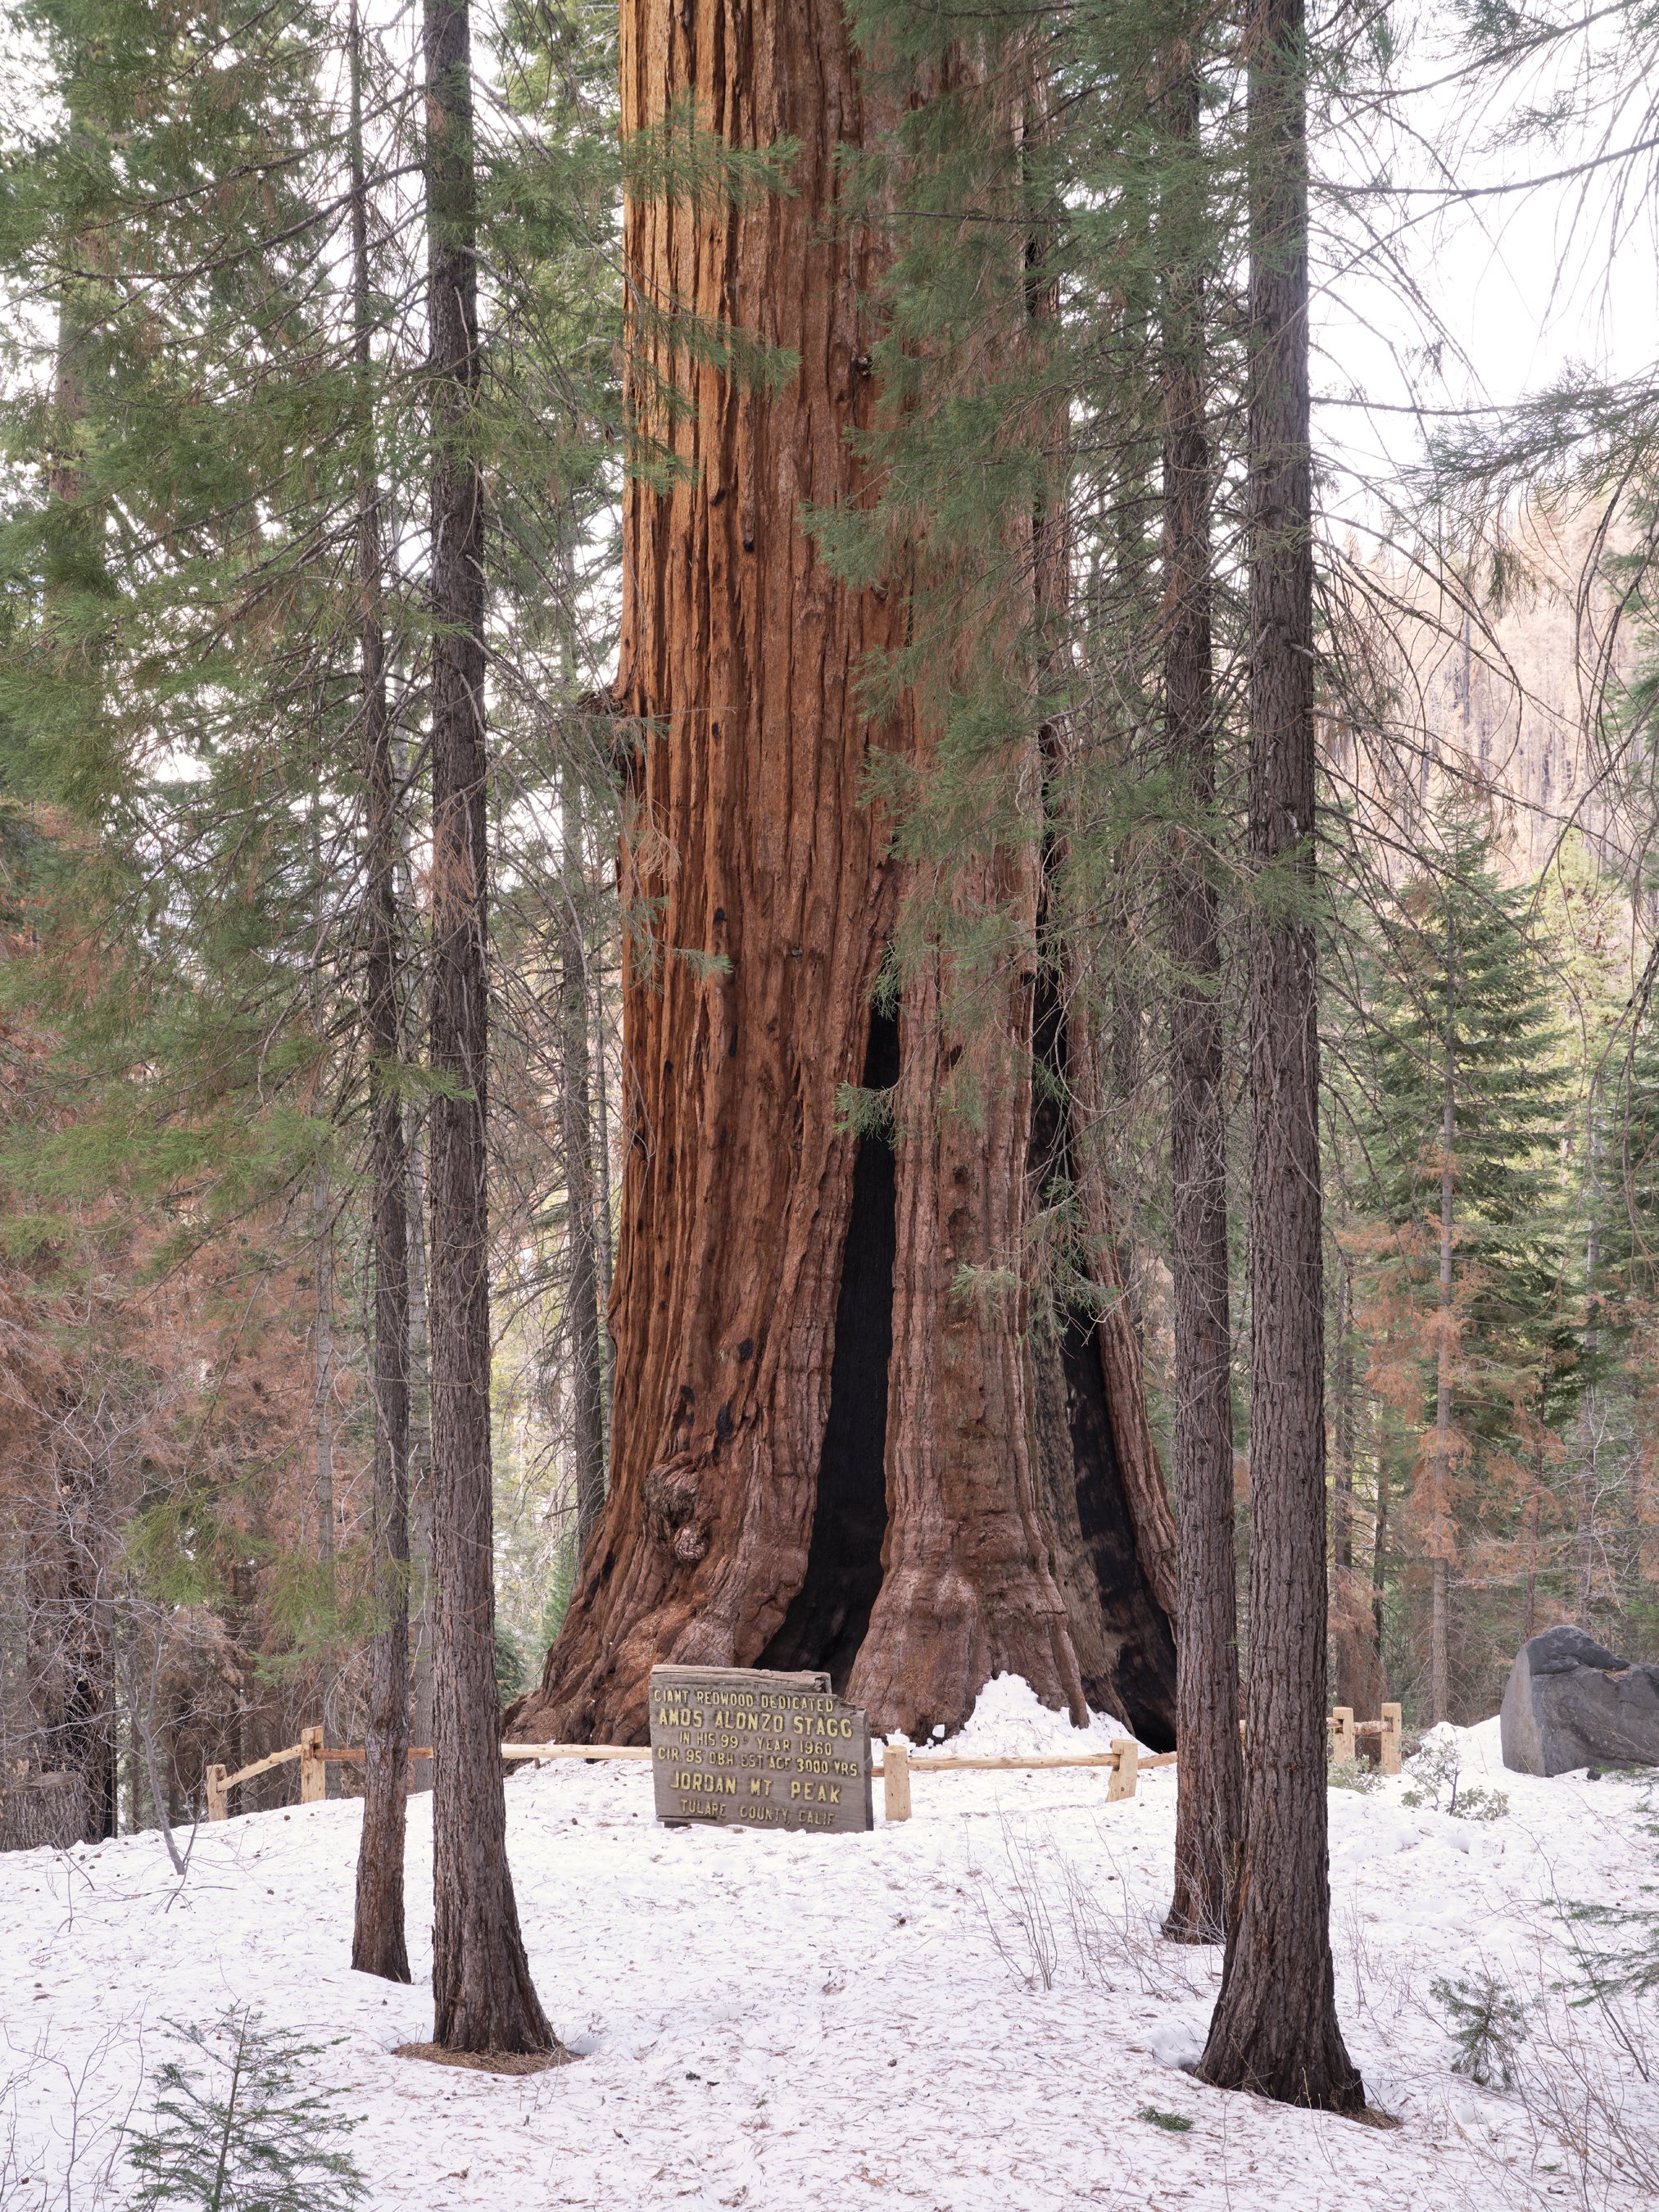 gathering_growth_foundation_stagg_tree_giant_sequoia_brian_kelley_02-2022_08.jpg